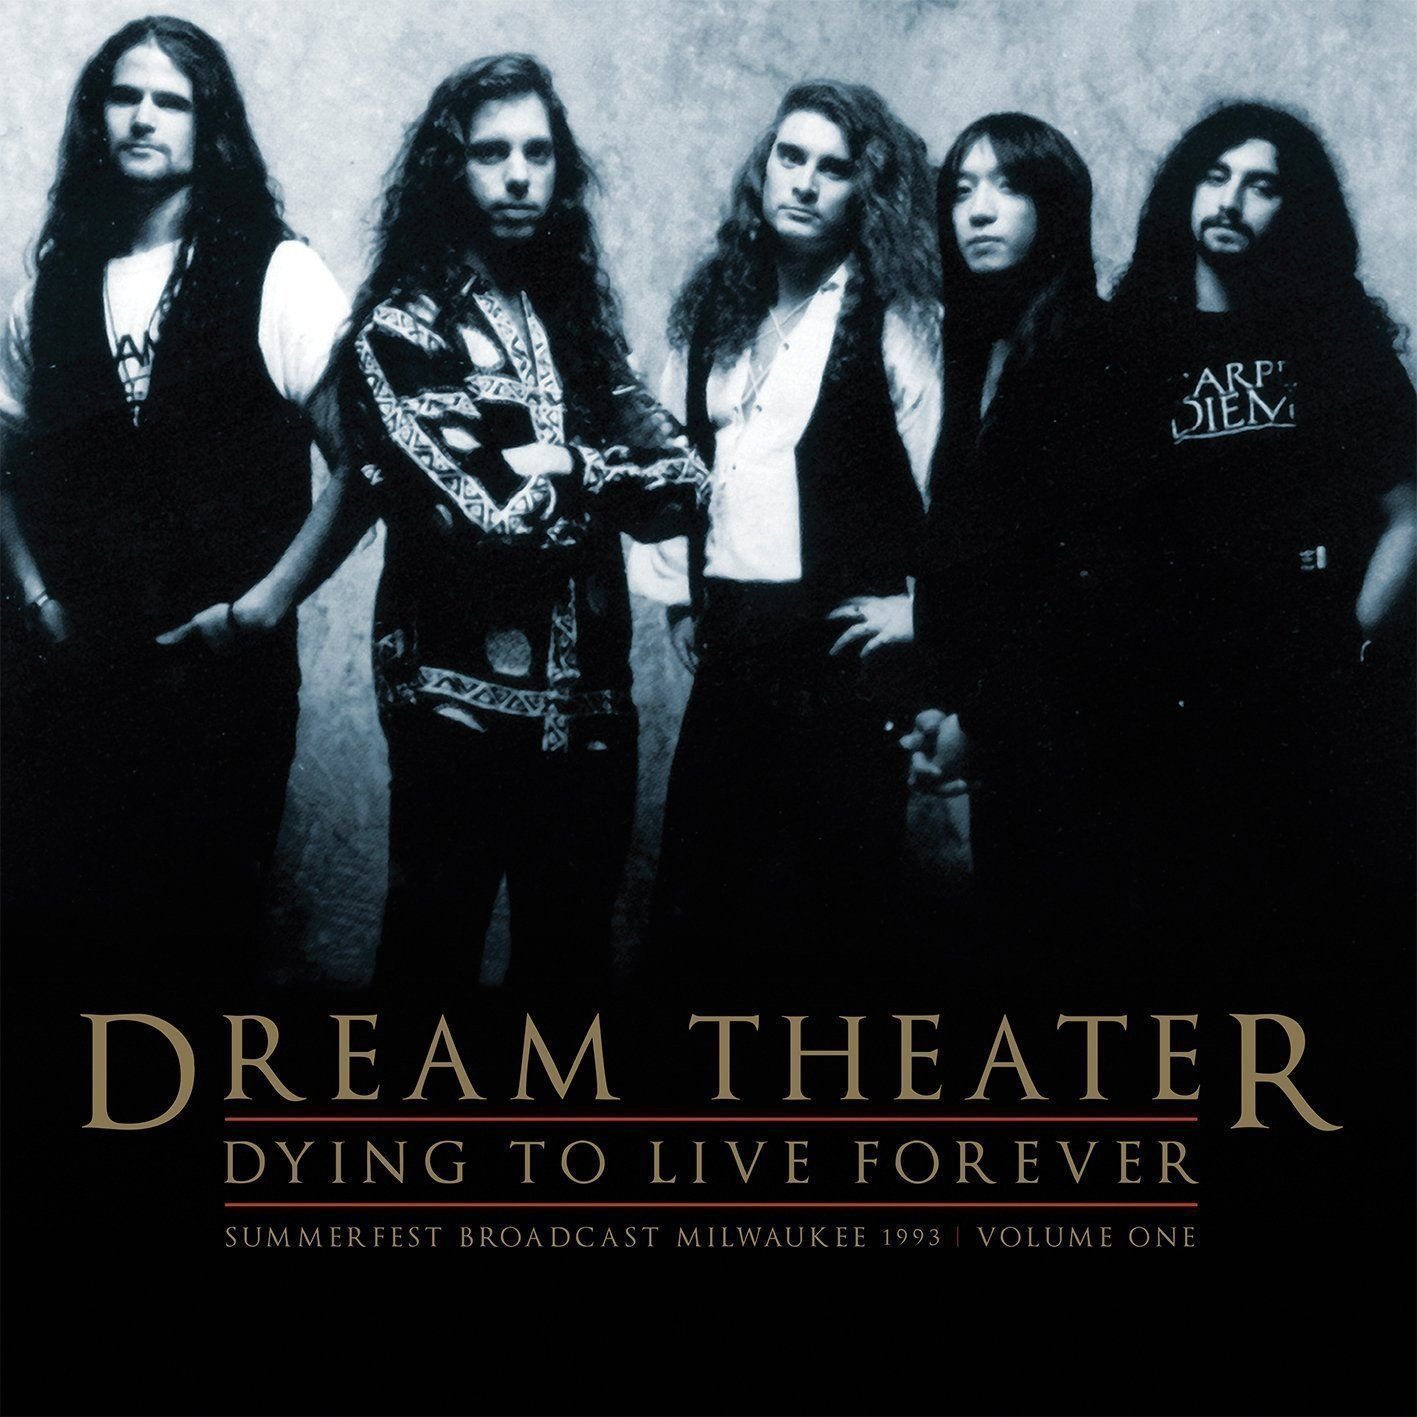 Vinyl Record Dream Theater - Dying To Live Forever - Milwaukee 1993 Vol. 1 (2 LP)